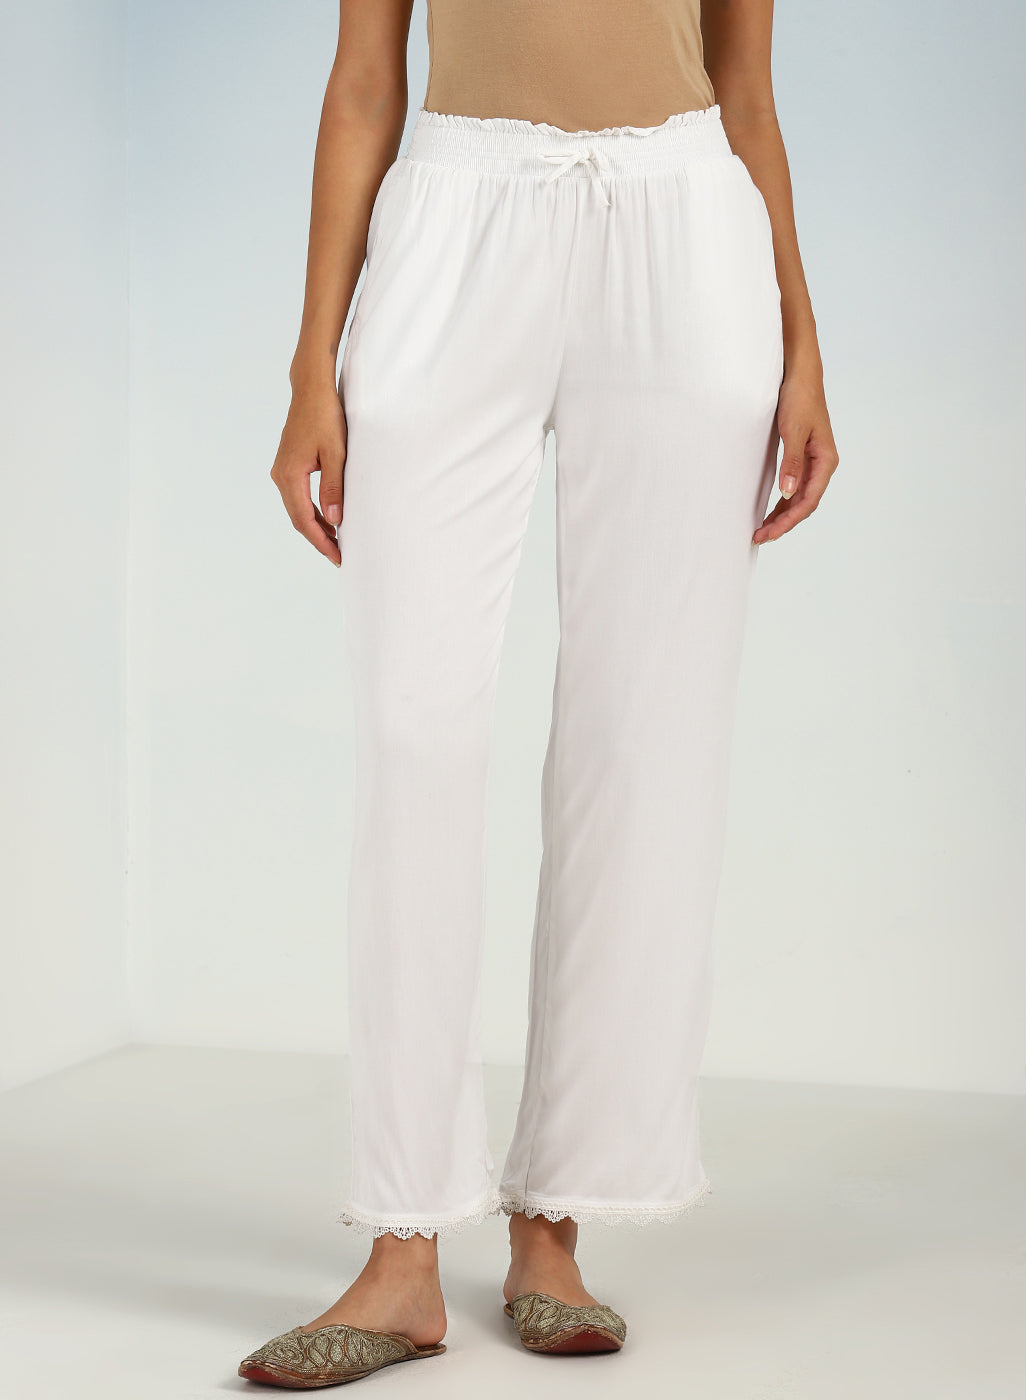 Ivory Ankle-length Pants for Women with drawstring Waist and Lace Work on  the Hem